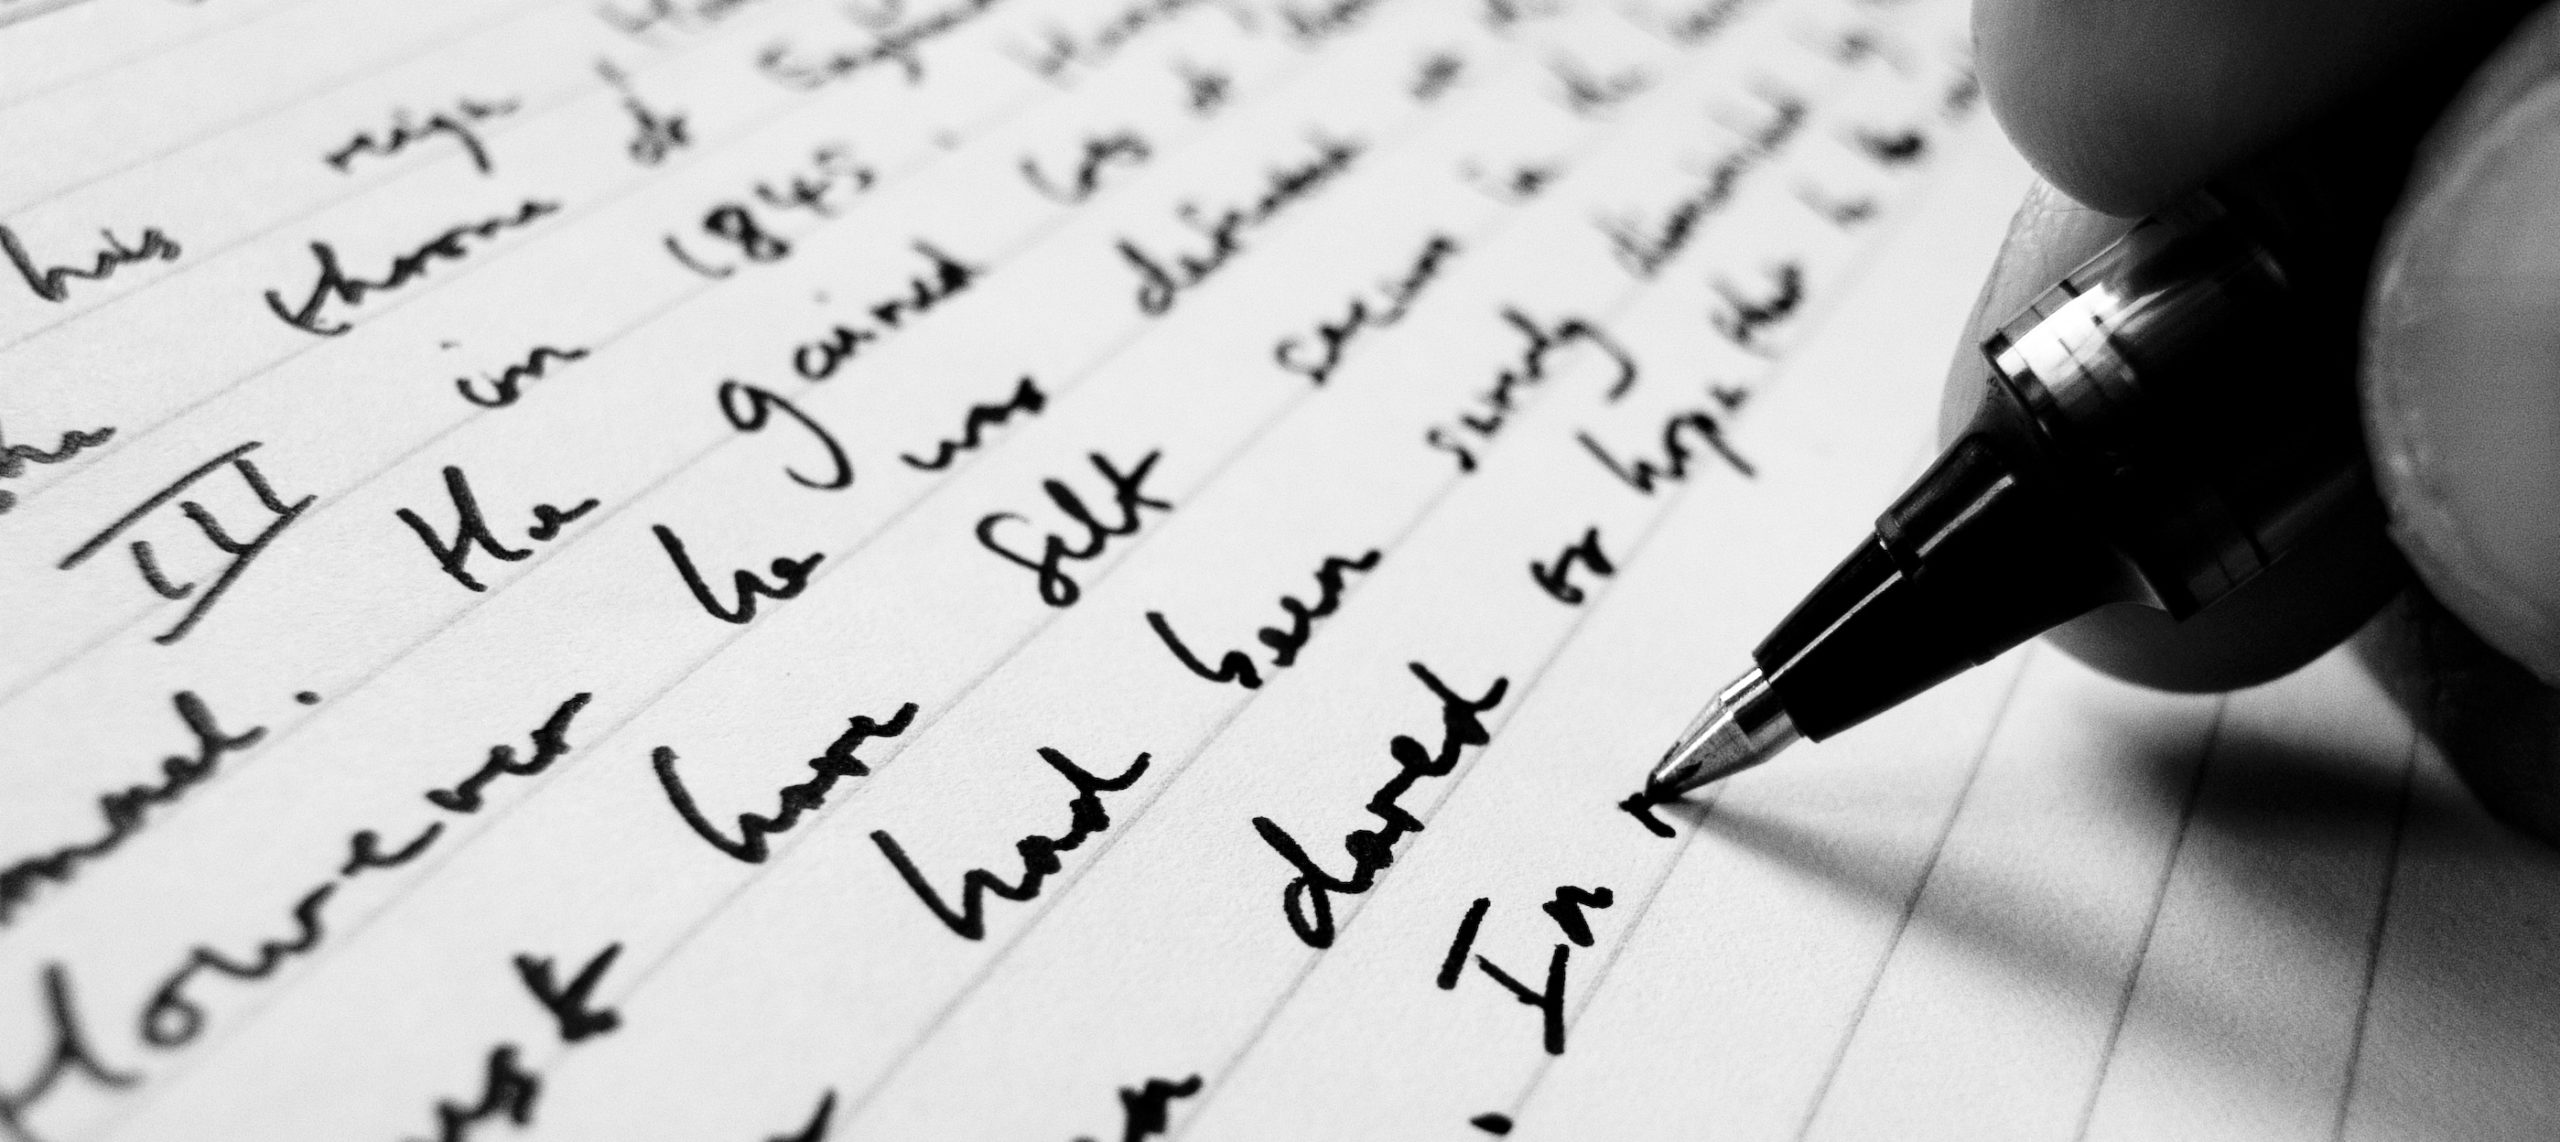 Stock photo of a pen writing in blank ink on ruled paper